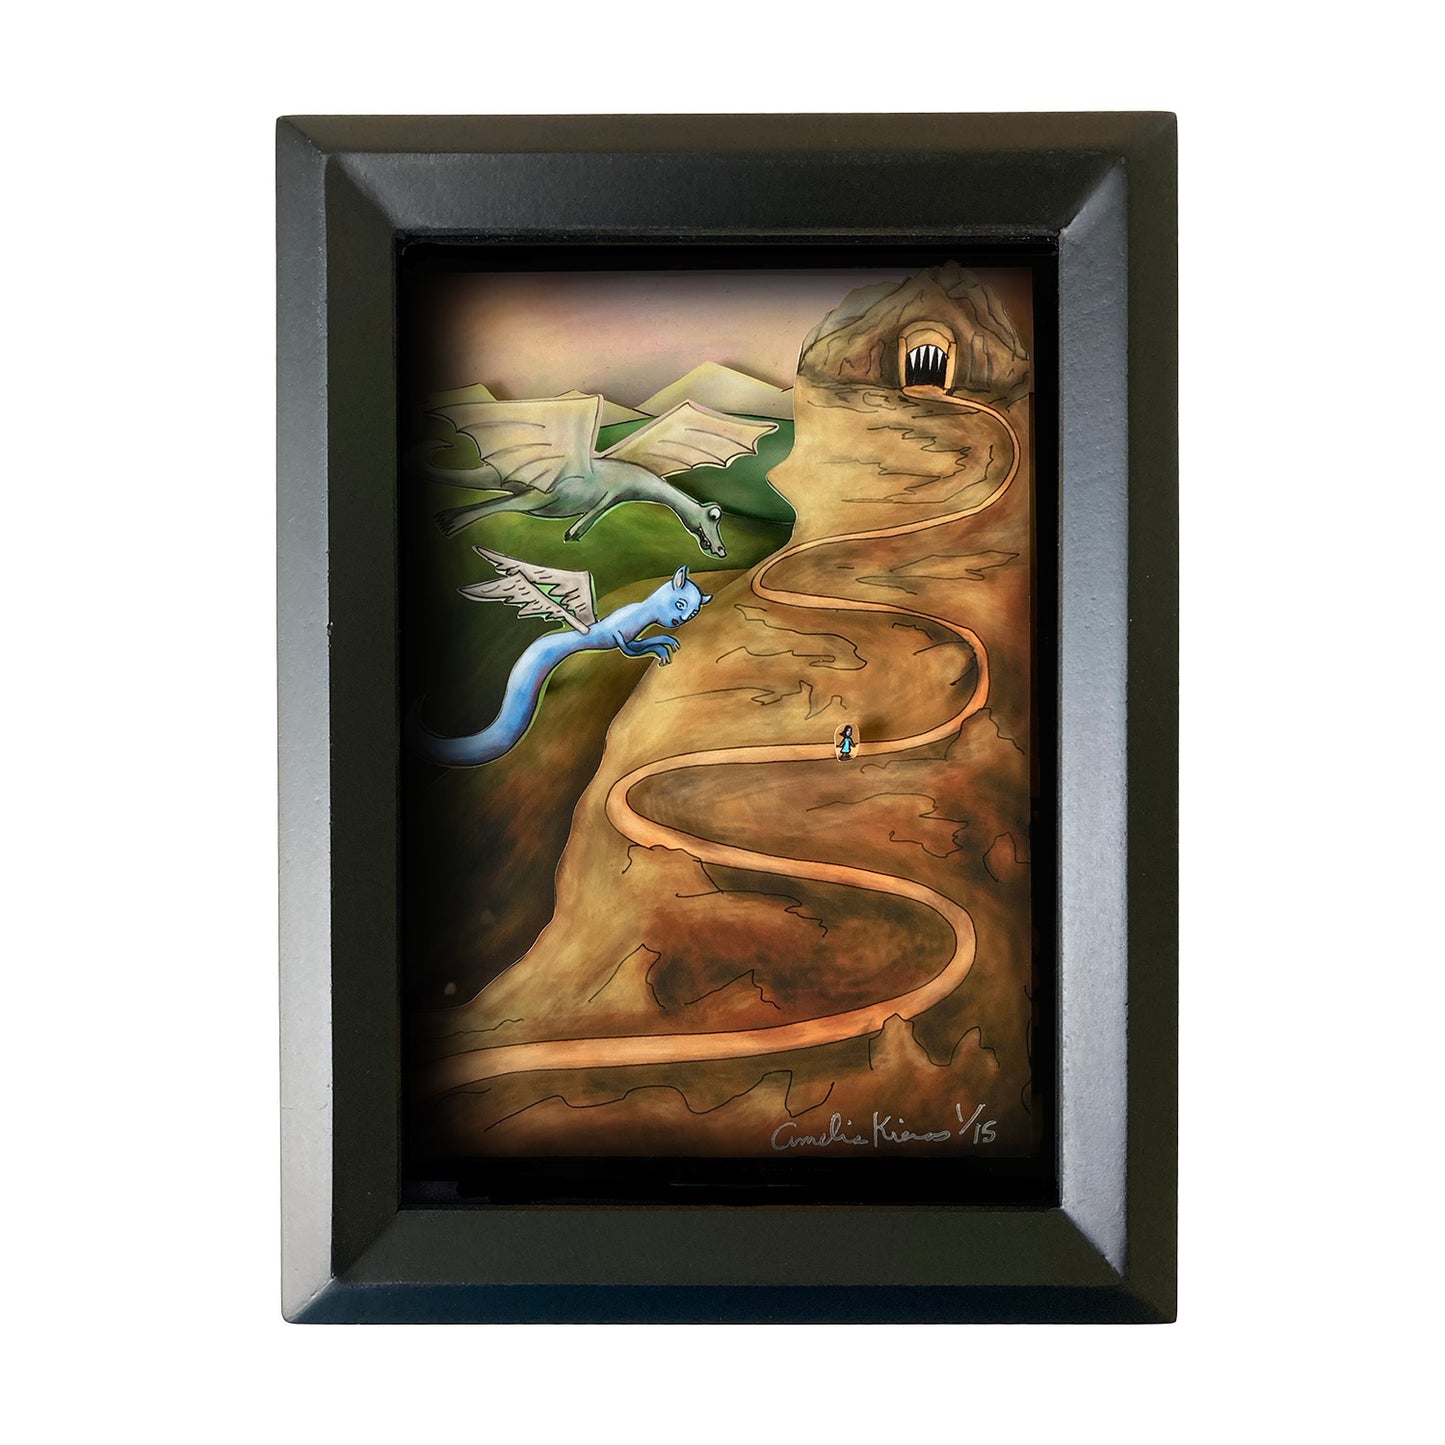 Another Journey - Limited Edition Shadow Box Wall Art